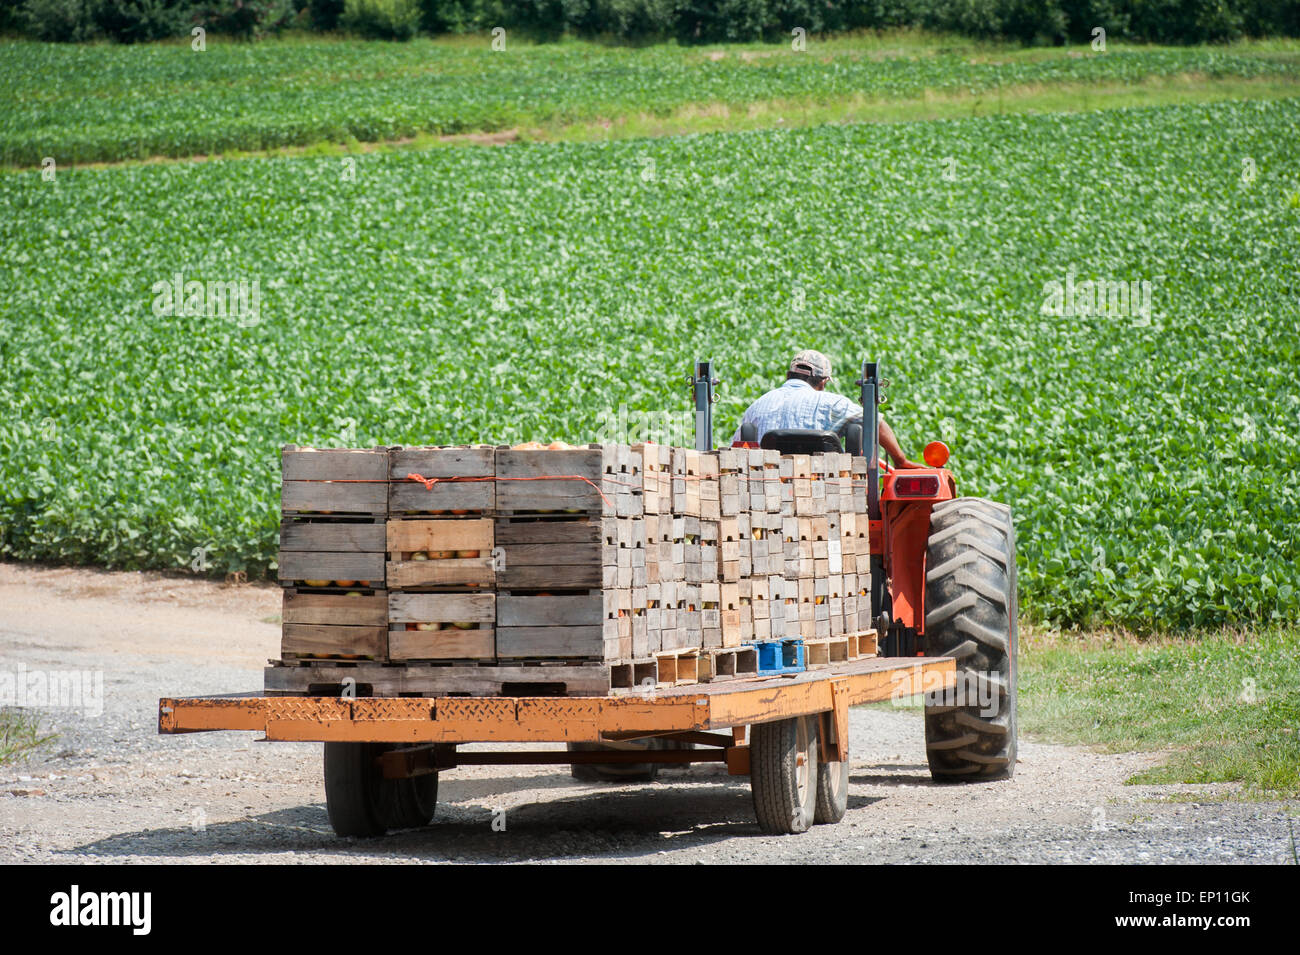 Tractor hauling crates of tomatoes in Westminster, Maryland, USA Stock Photo